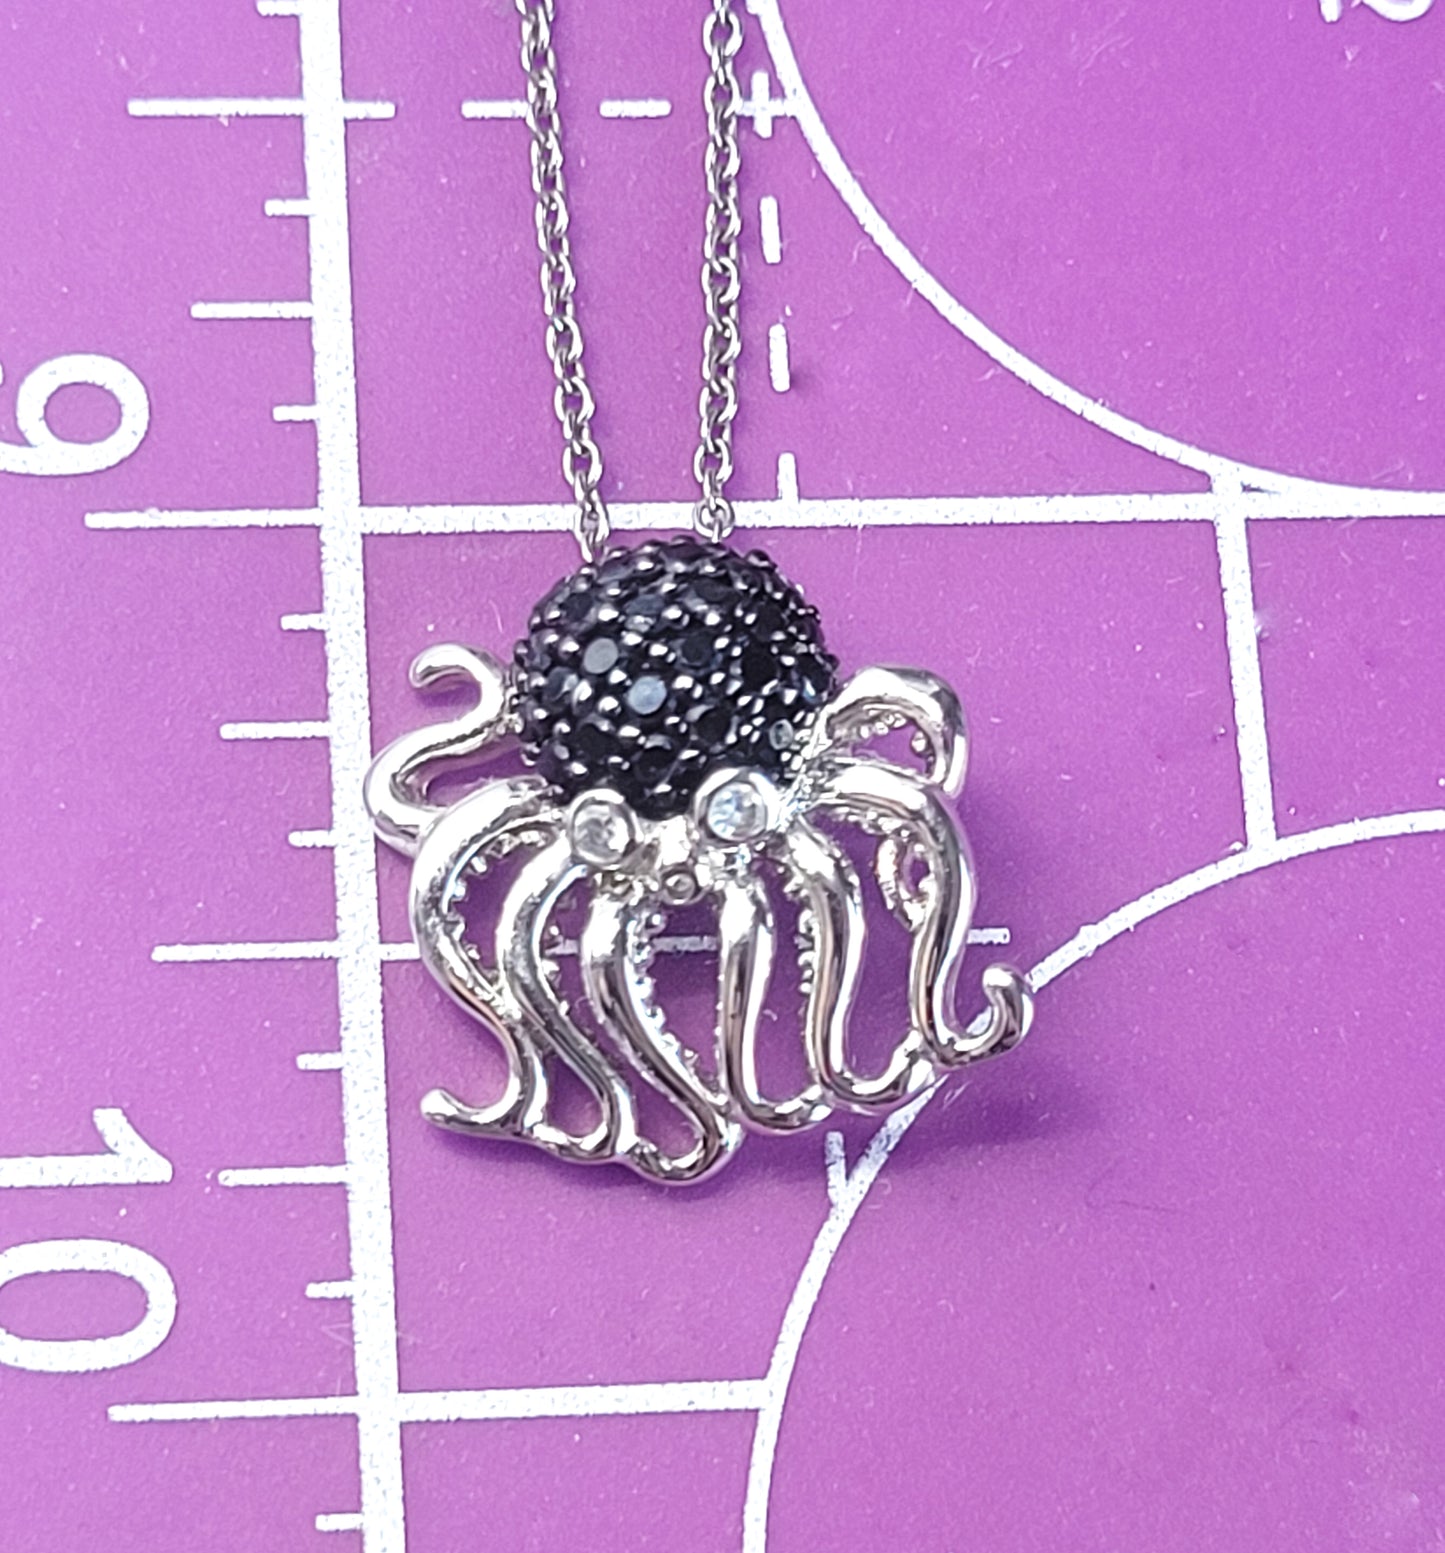 Octopus black and white Cubic Zirconia FD signed sterling silver pendant necklace